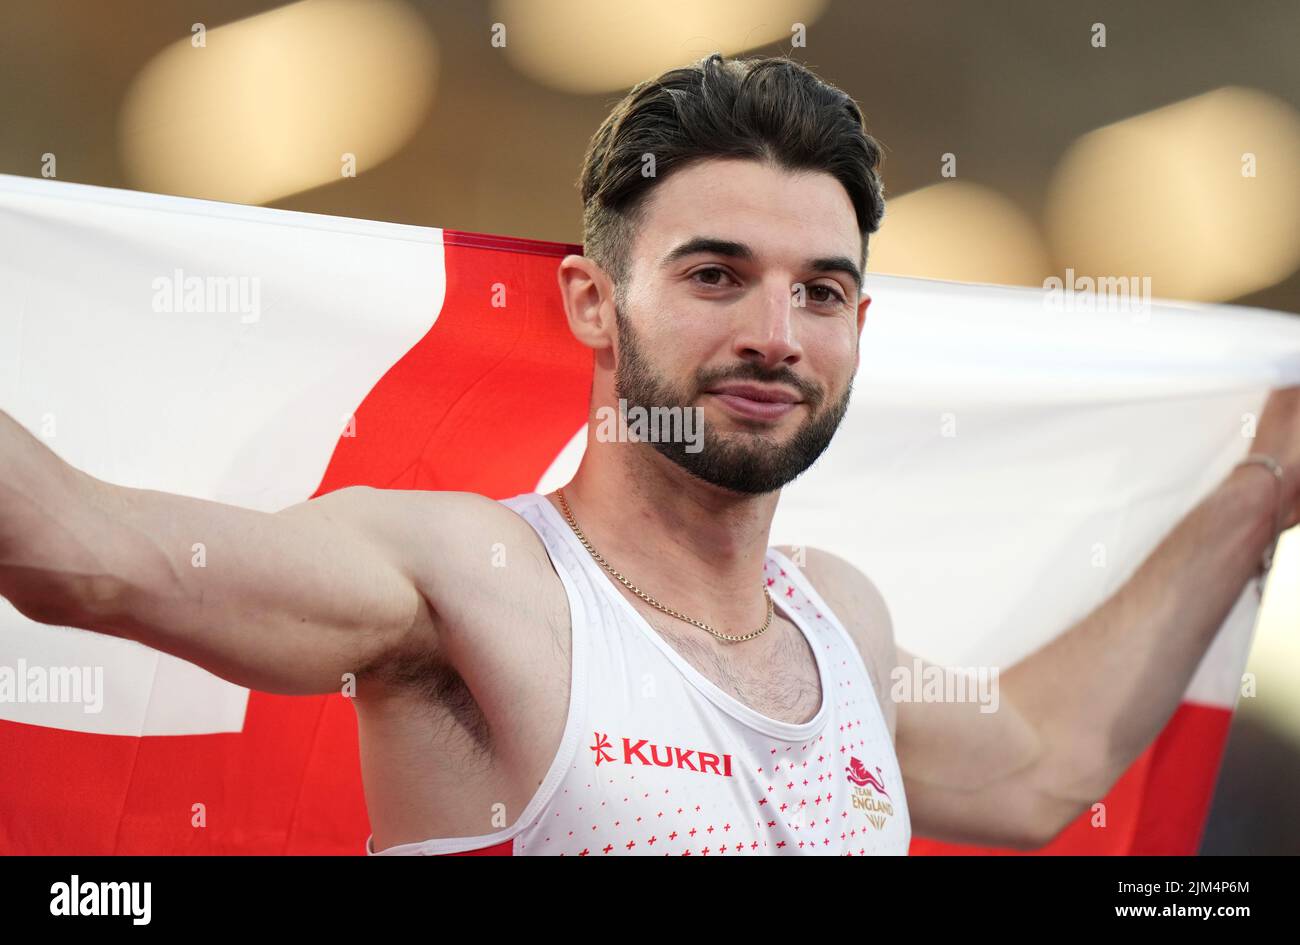 England's Zachary Alexander Shaw celebrates taking the silver medal after the Men's T11/12 100m Final at Alexander Stadium on day seven of the 2022 Commonwealth Games in Birmingham. Picture date: Thursday August 4, 2022. Stock Photo